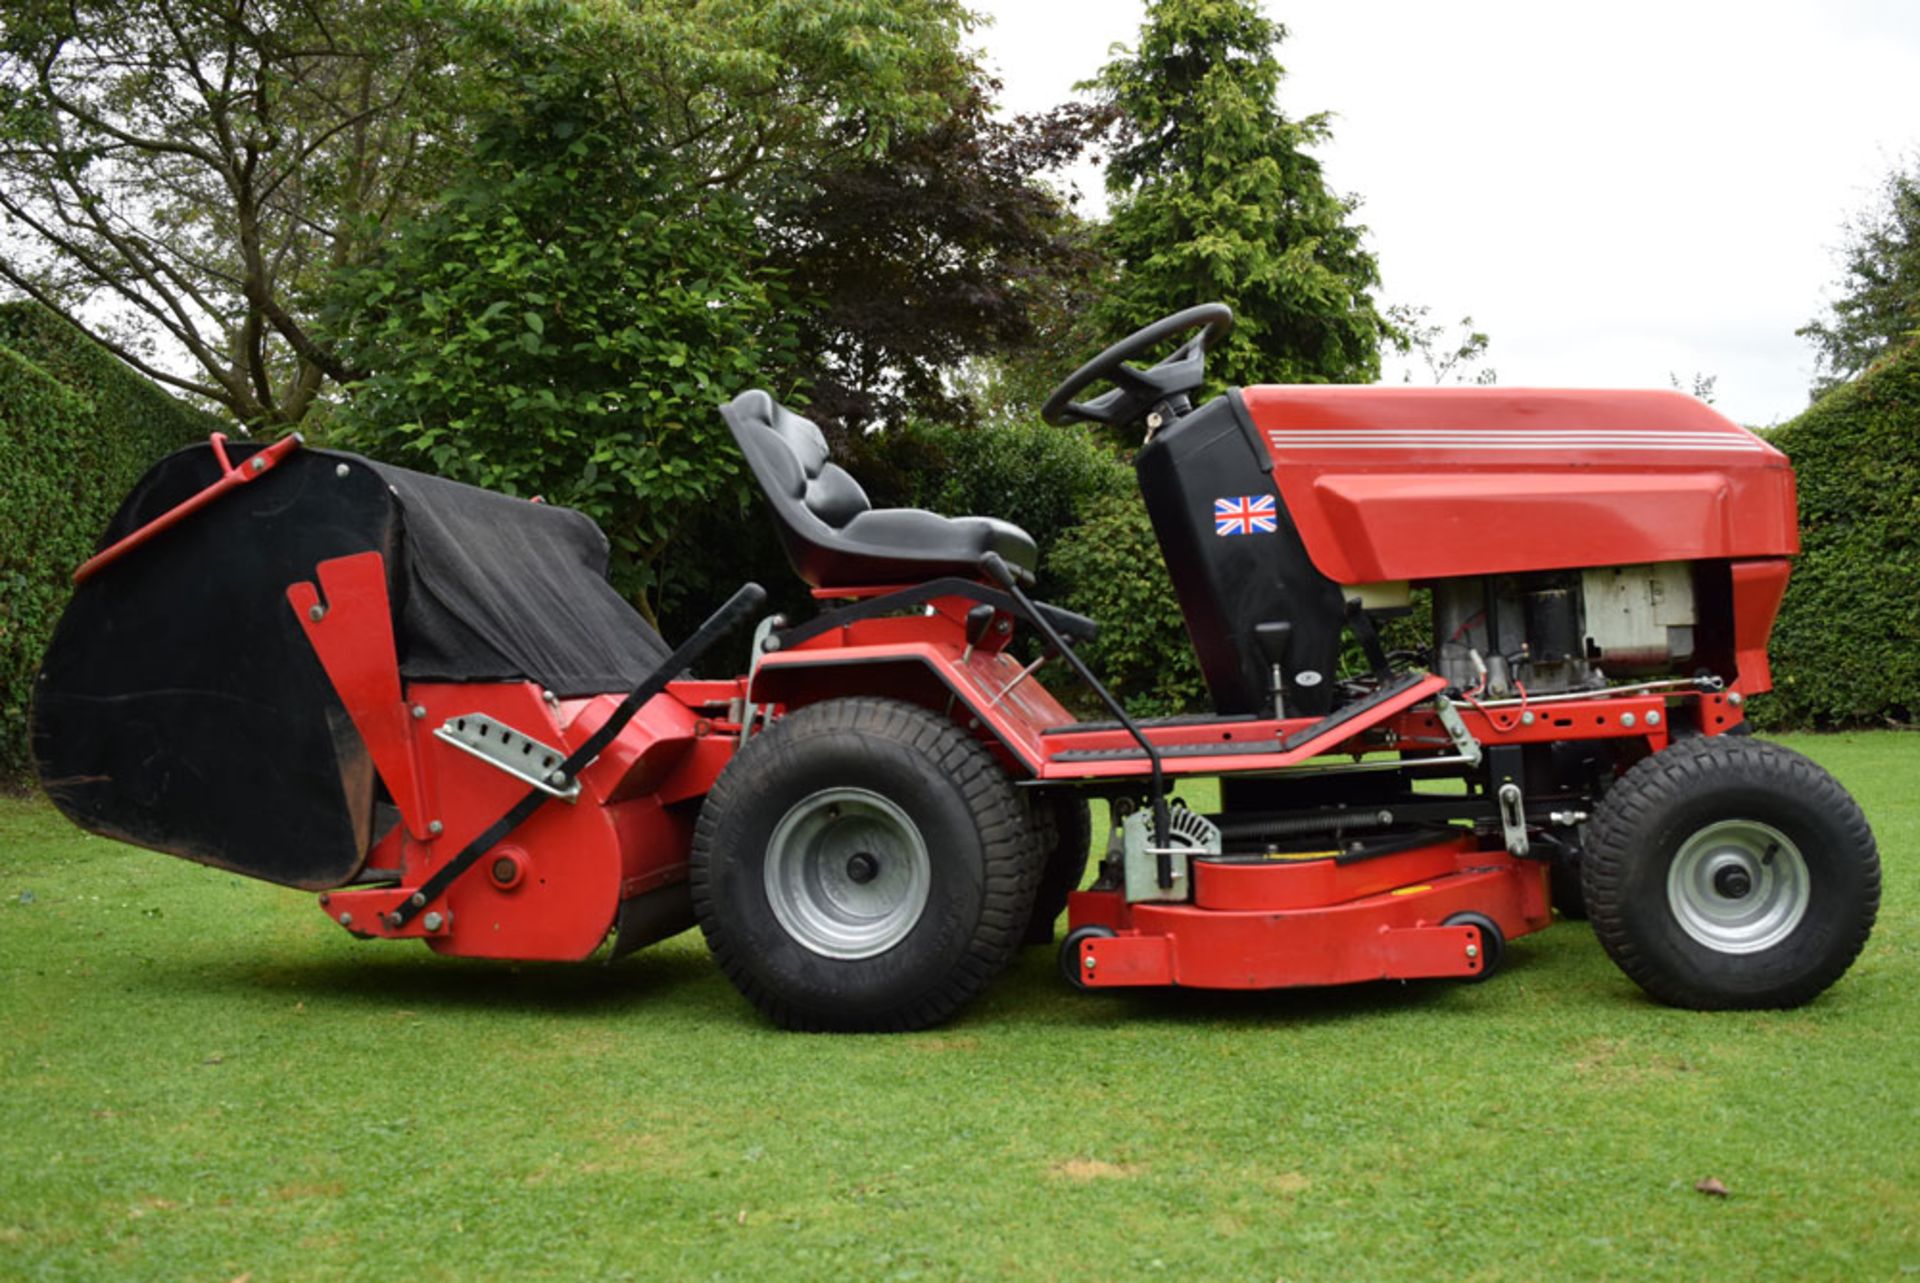 1999 Westwood S1300M 36"" Rear Discharge Garden Tractor With PGC - Image 2 of 3